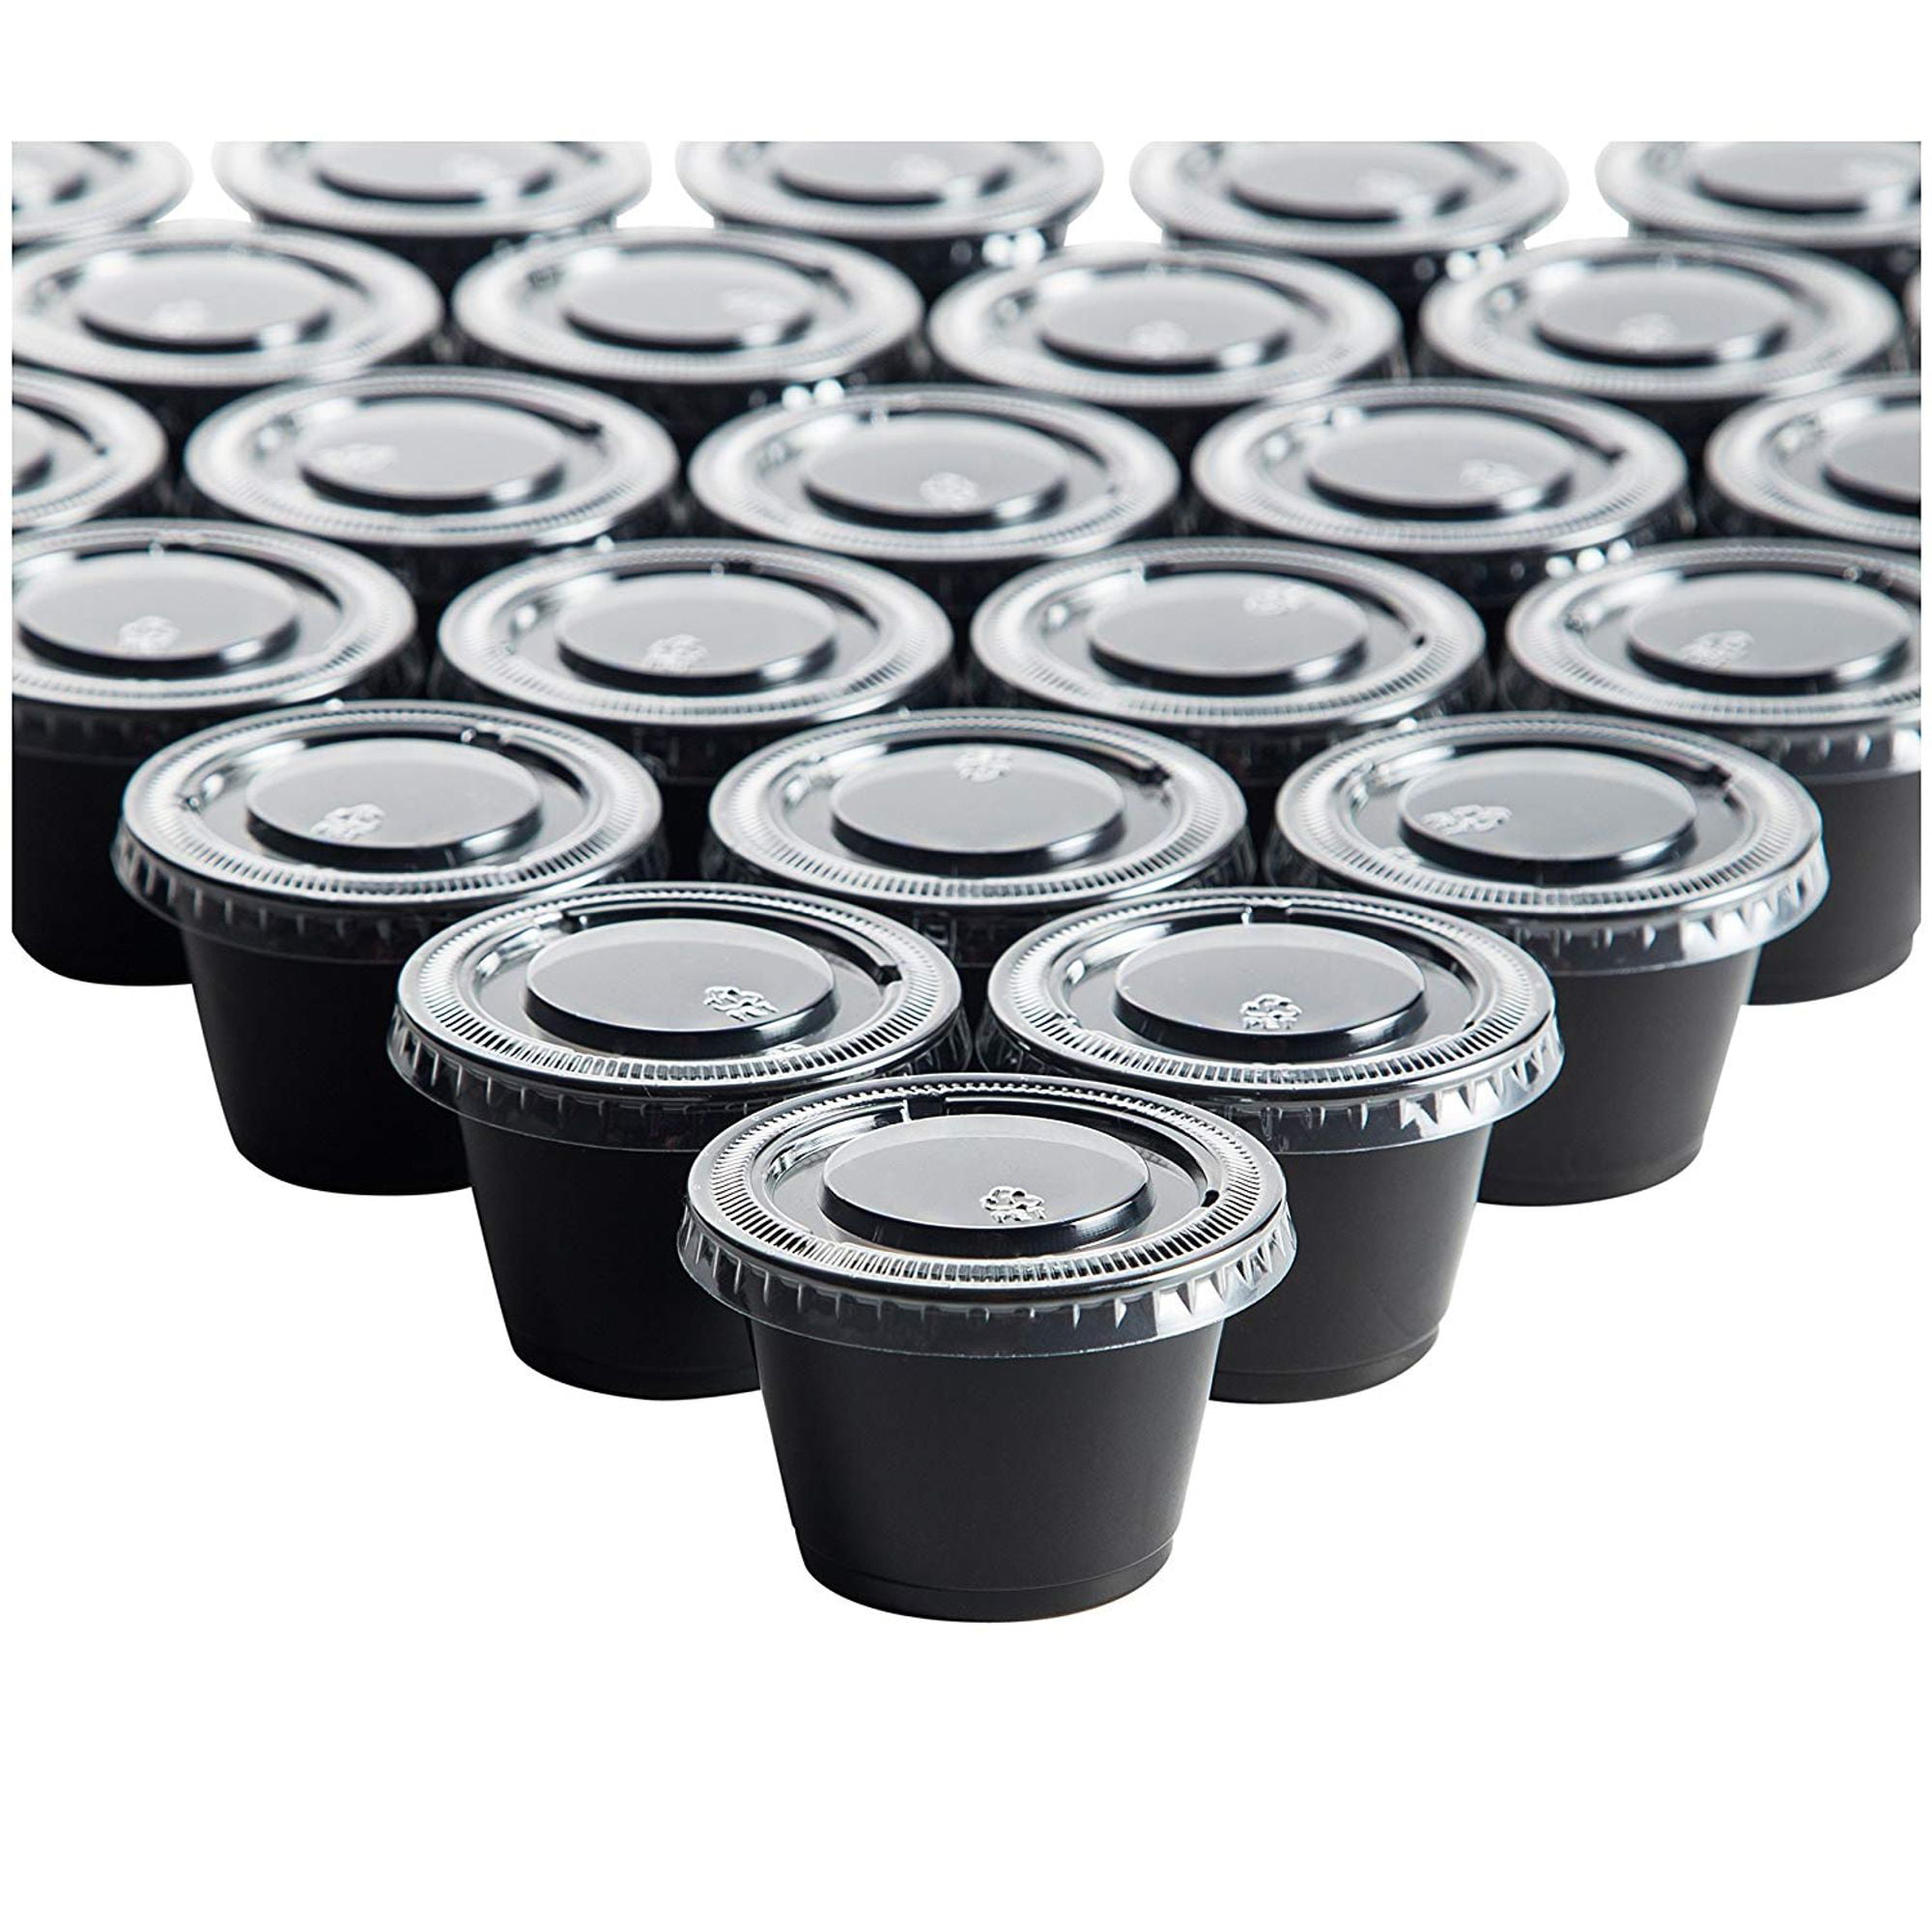 Plastic Portion Cups with Lids - 250-Piece Disposable to-go Sauce, Condiment, Sampling, Souffle ...